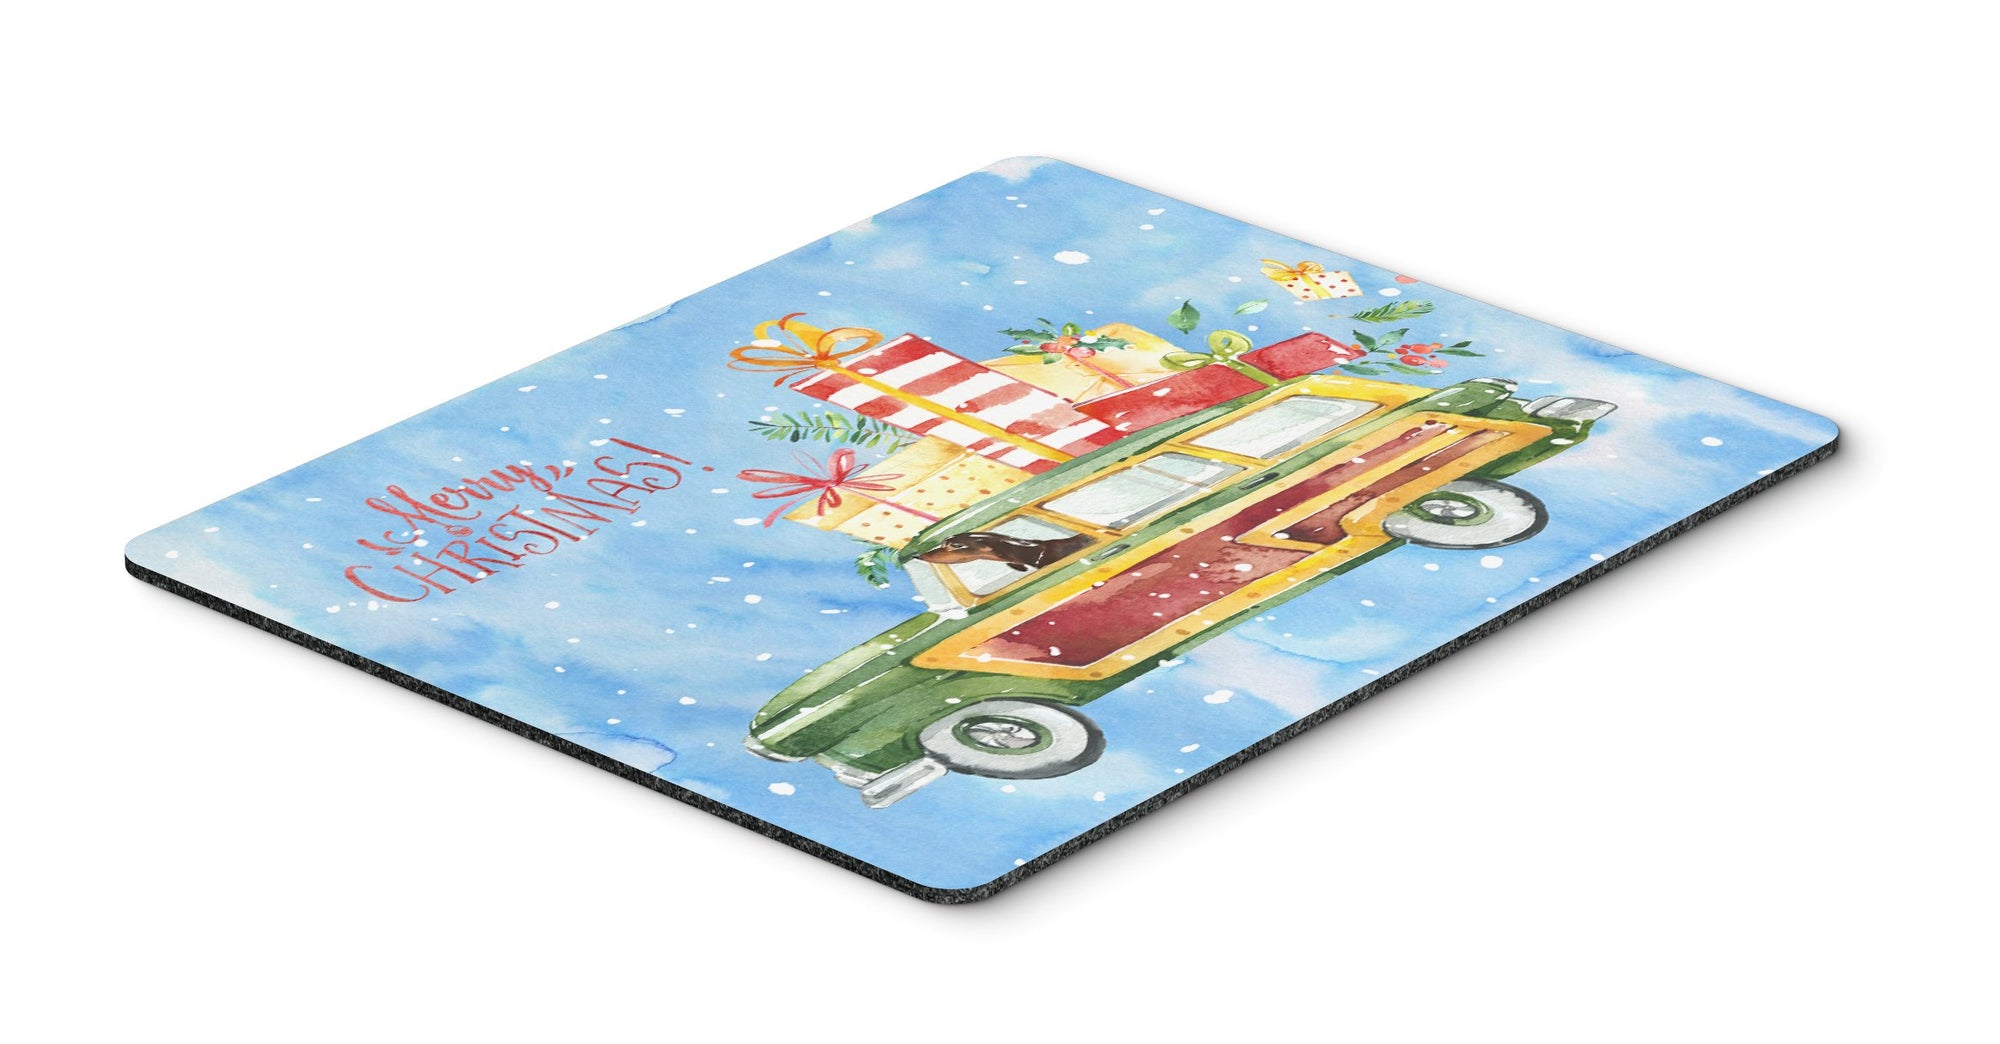 Merry Christmas Dachshund Mouse Pad, Hot Pad or Trivet CK2443MP by Caroline's Treasures